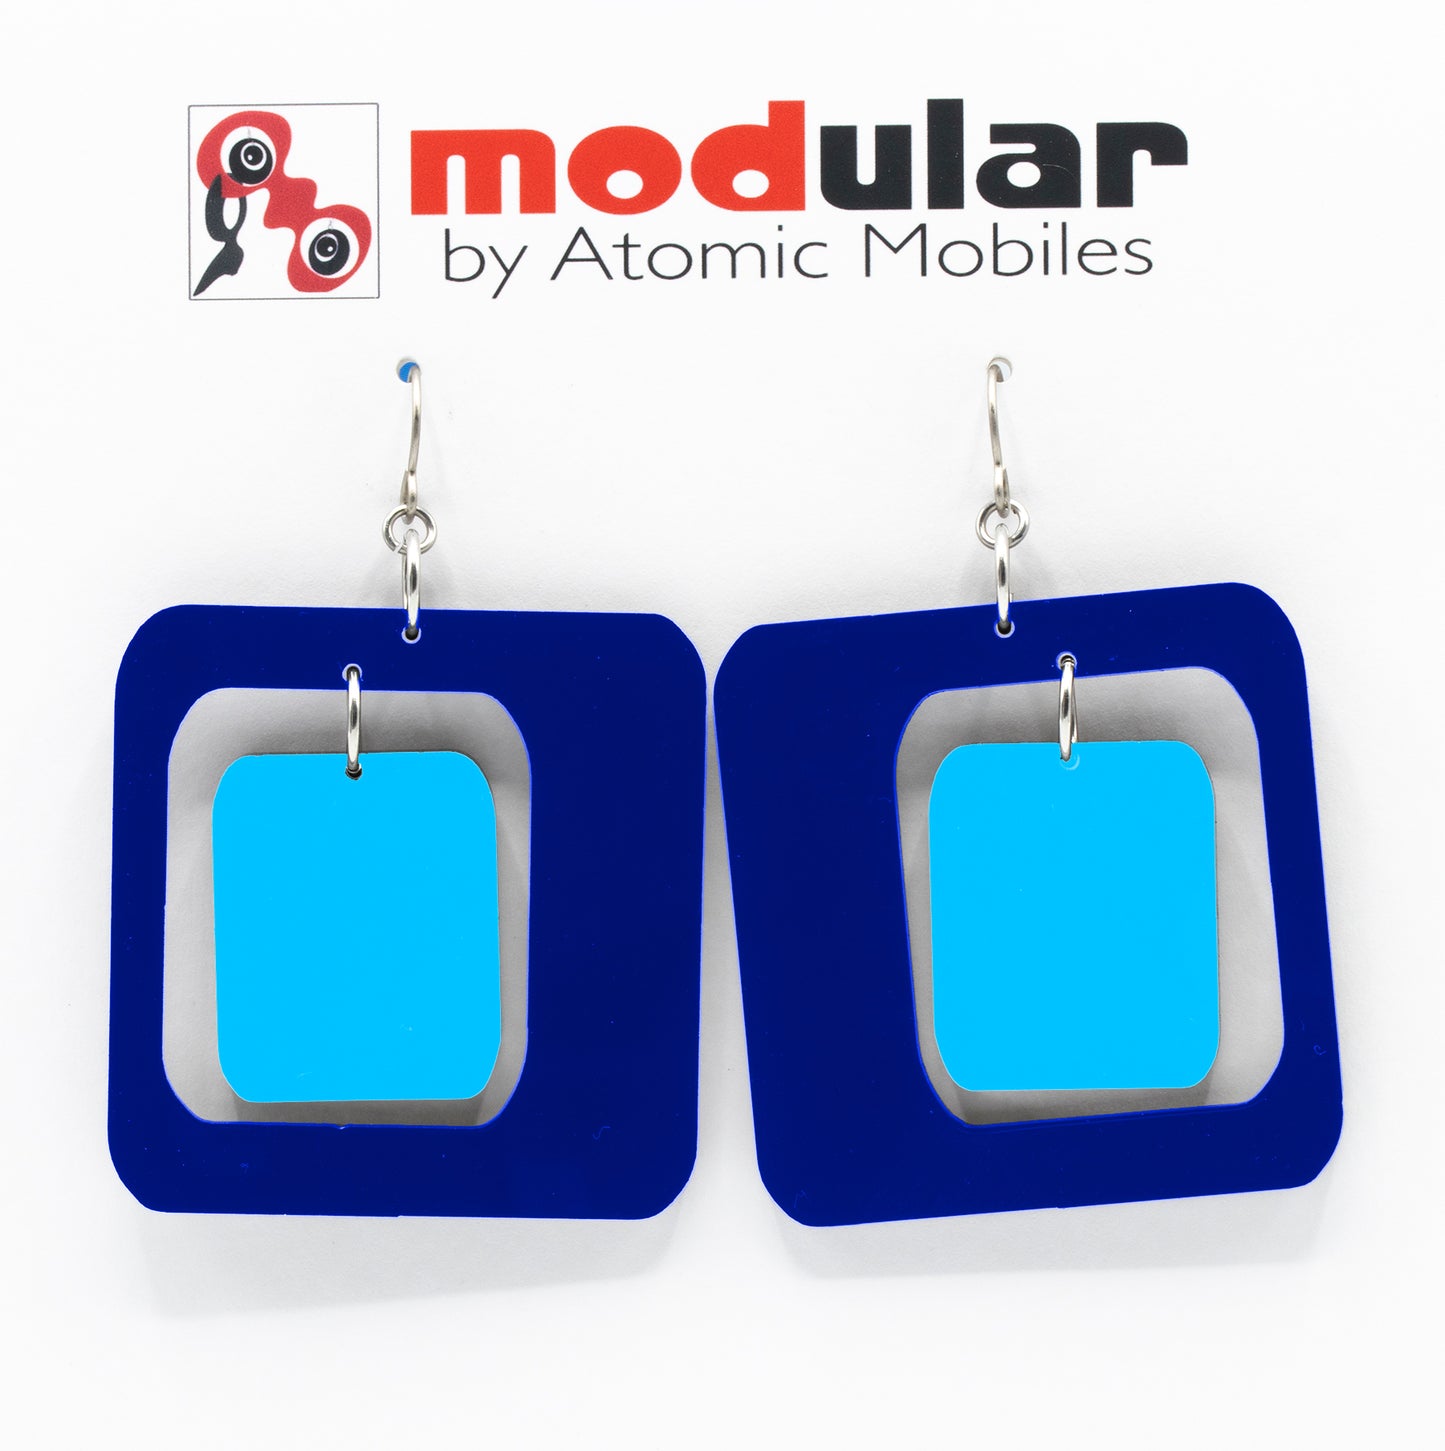 MODular Earrings - Coolsville Statement Earrings in Navy Blue by AtomicMobiles.com - retro era inspired mod handmade jewelry